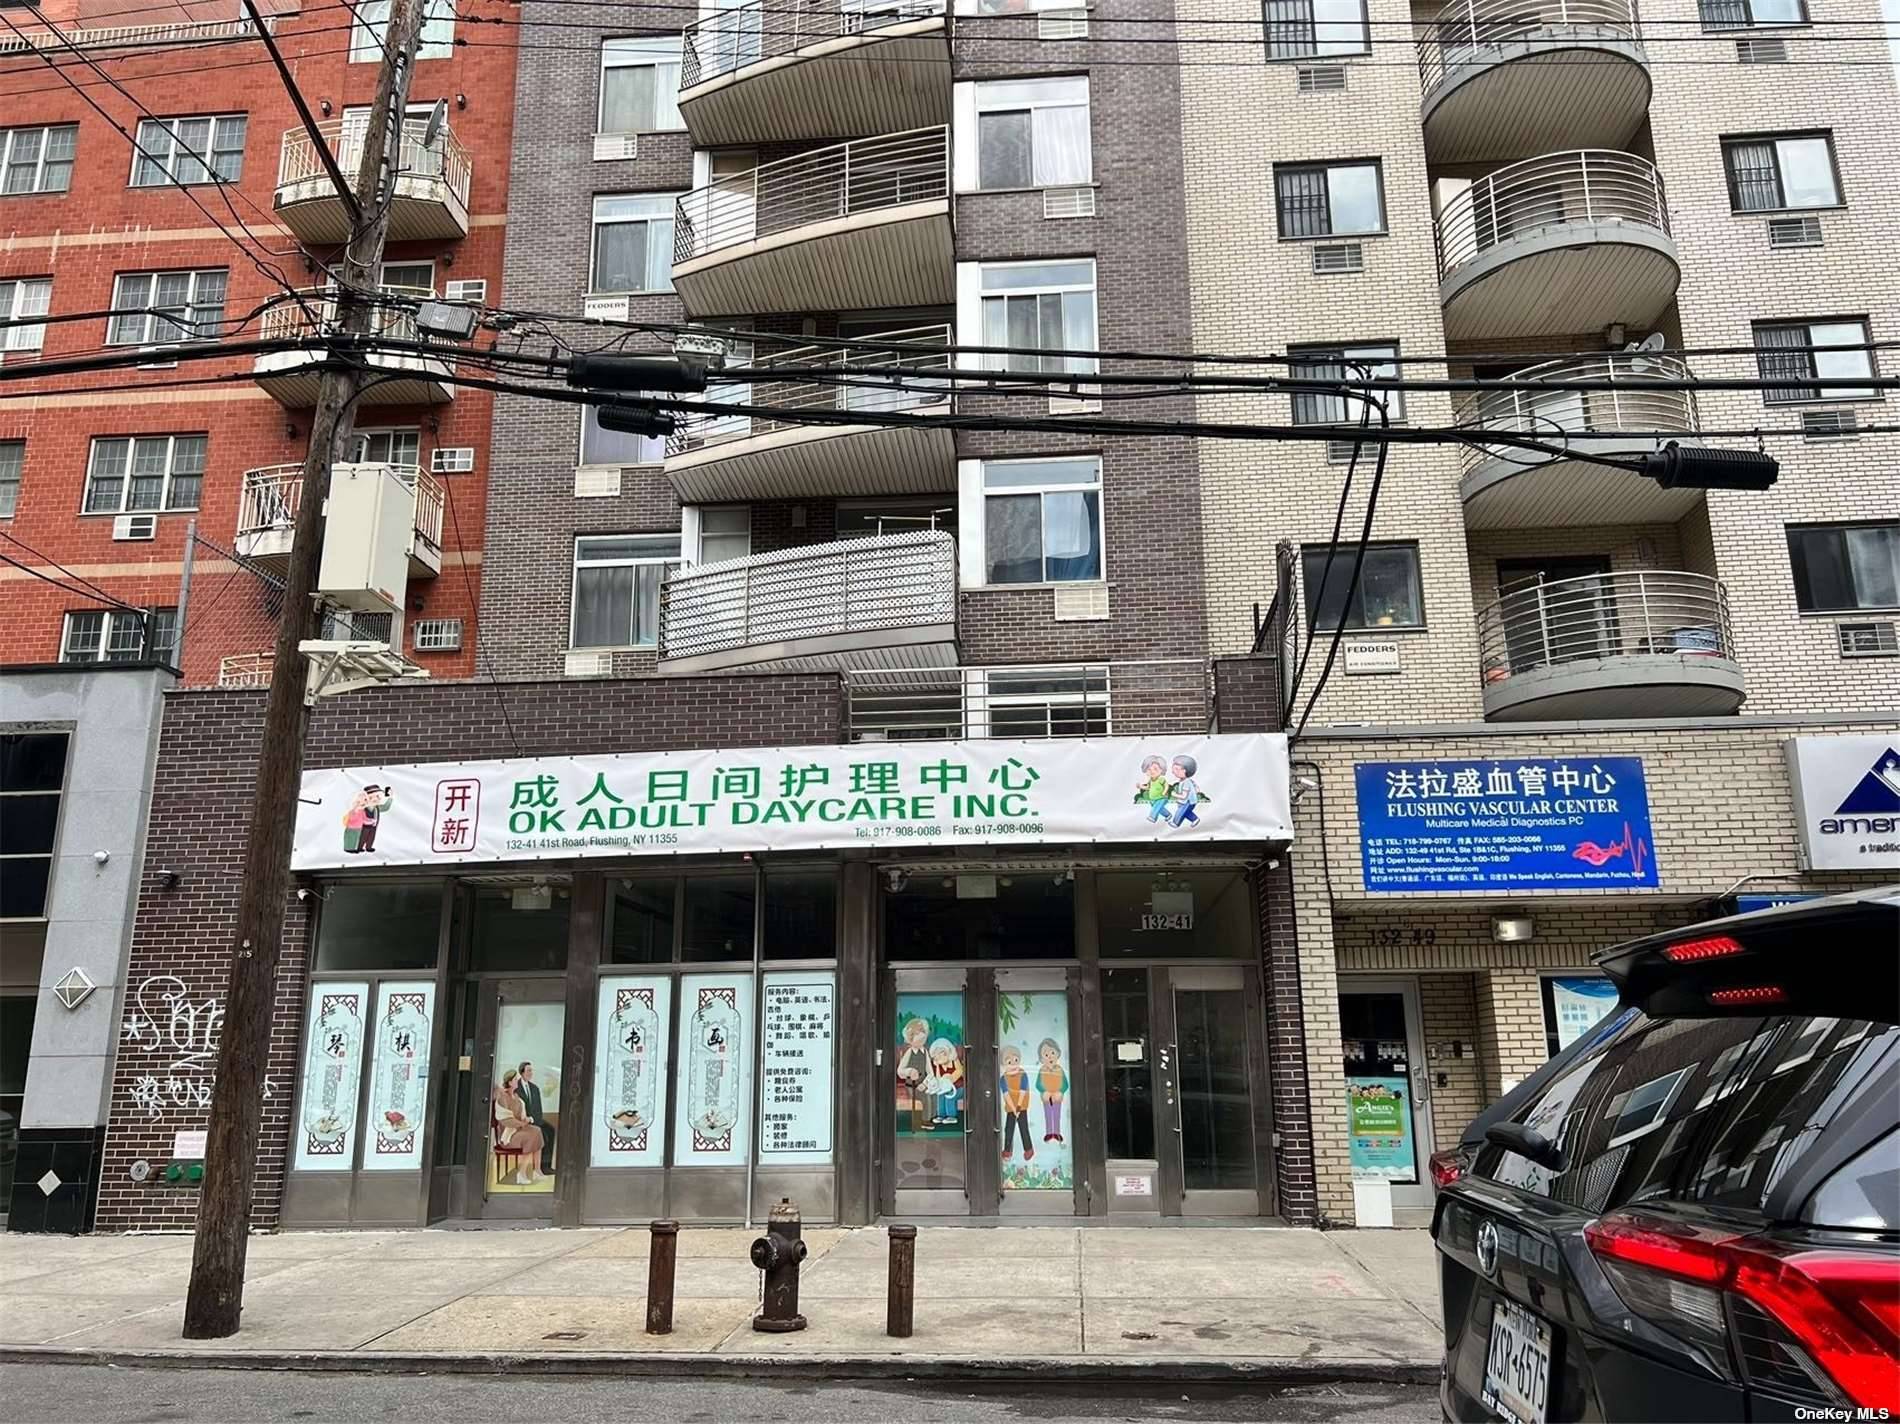 Prime Mixed Use Opportunity in the Heart of Flushing, NY Welcome to 132 45 41st Rd, a dynamic mixed use building offering an exceptional blend of commercial and residential spaces, ...